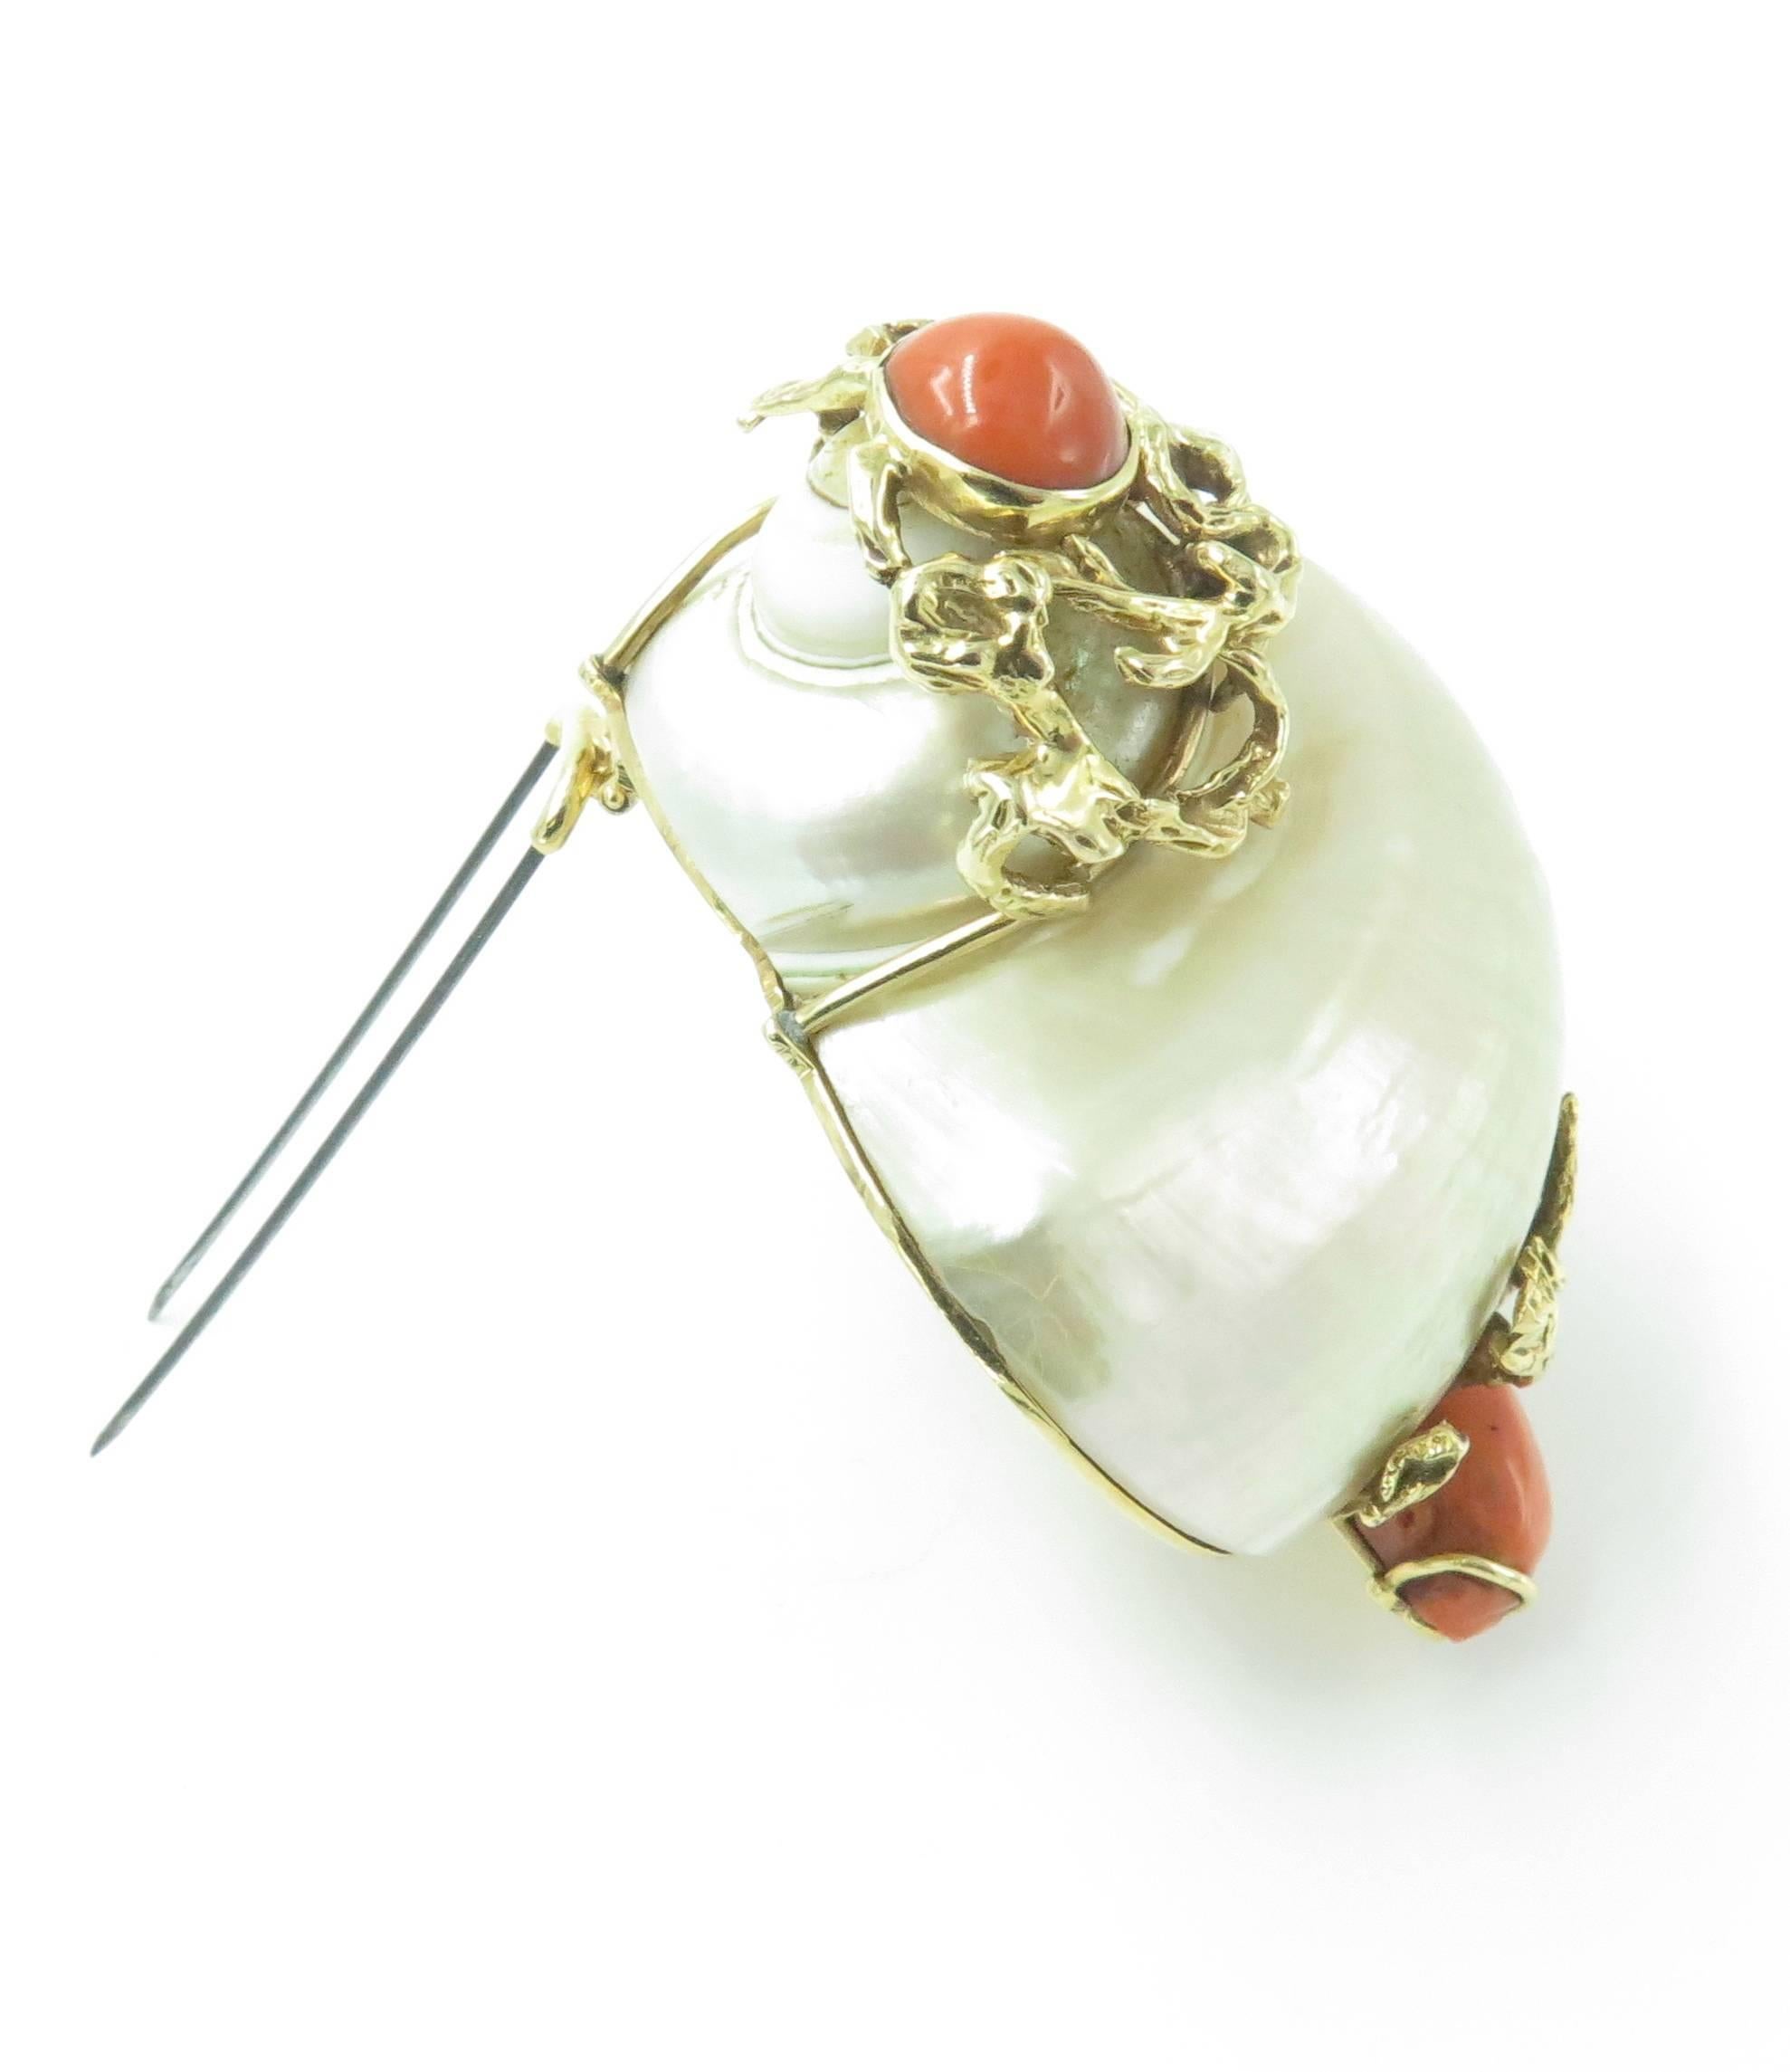 SEAMAN SCHEPPS Coral, Shell and Gold Brooch. 1